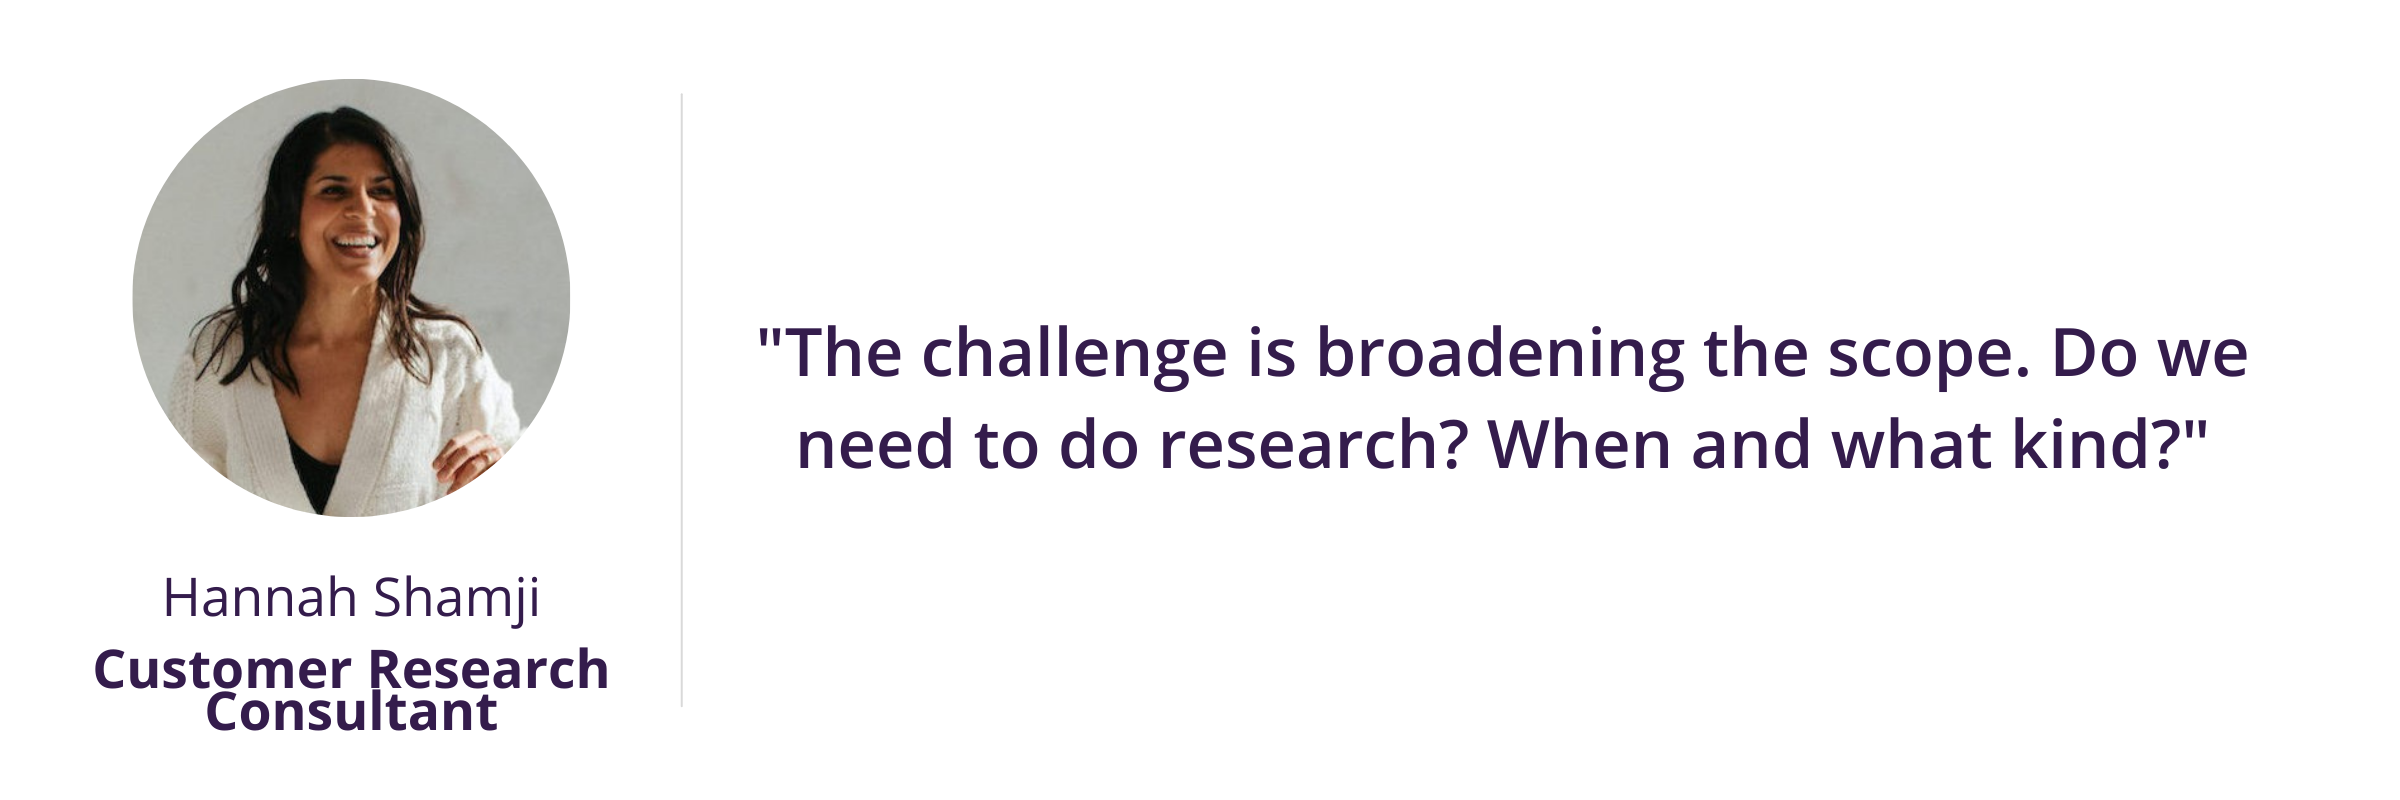 "The challenge is broadening the scope. Do we need to do research? When and what kind?"